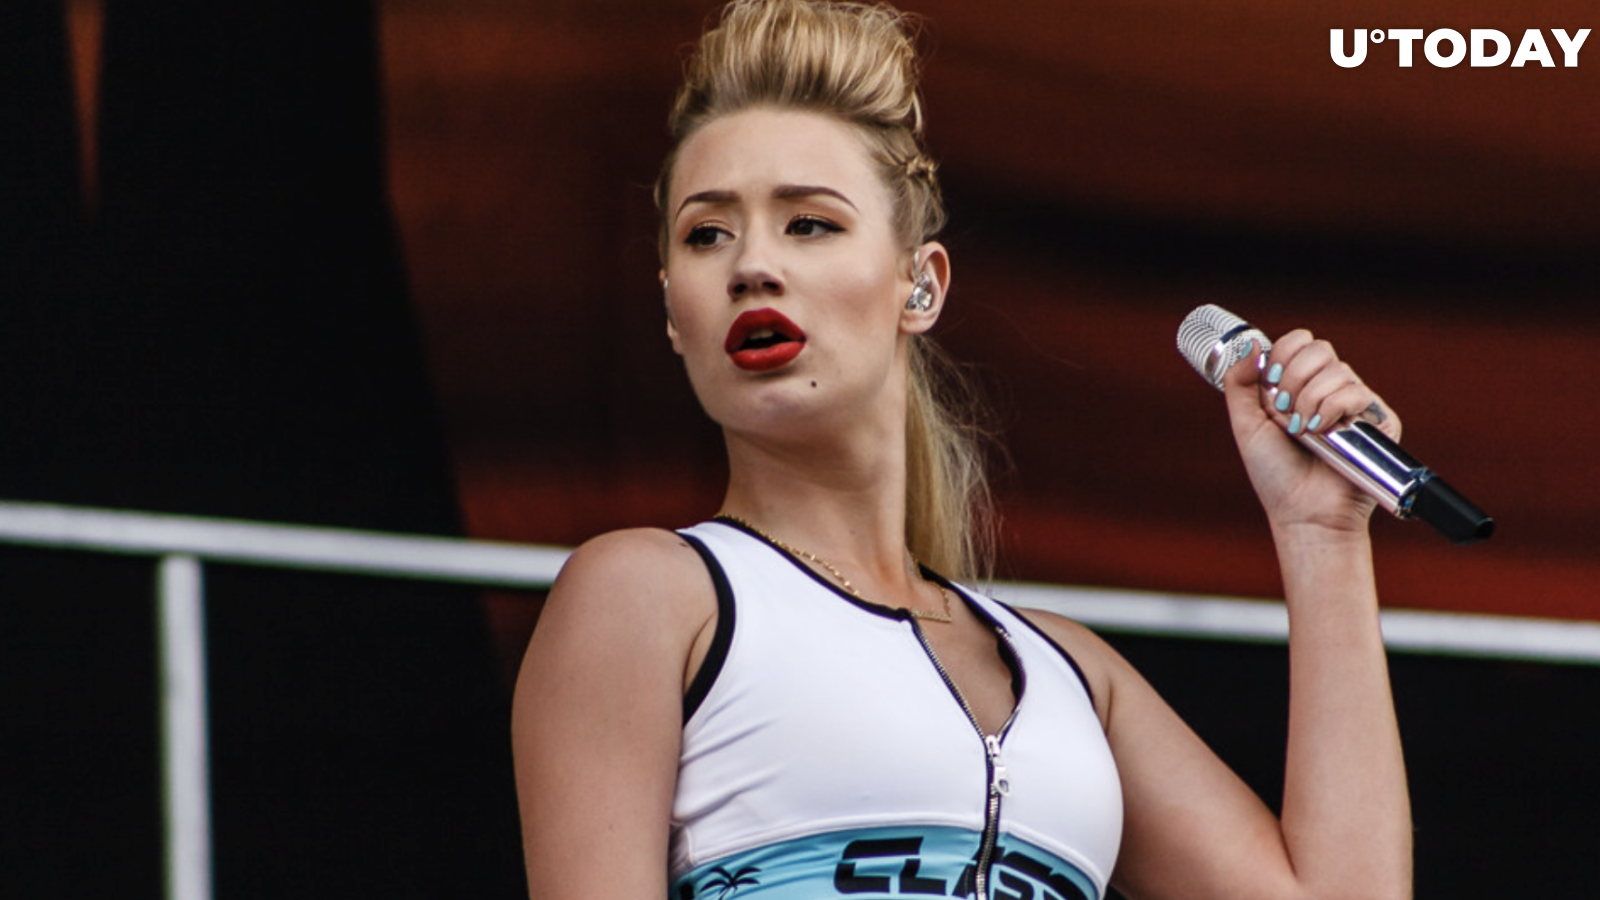 Iggy Azalea Insists She’s No Rug-Puller as Her Token Surges 1,000% in Week